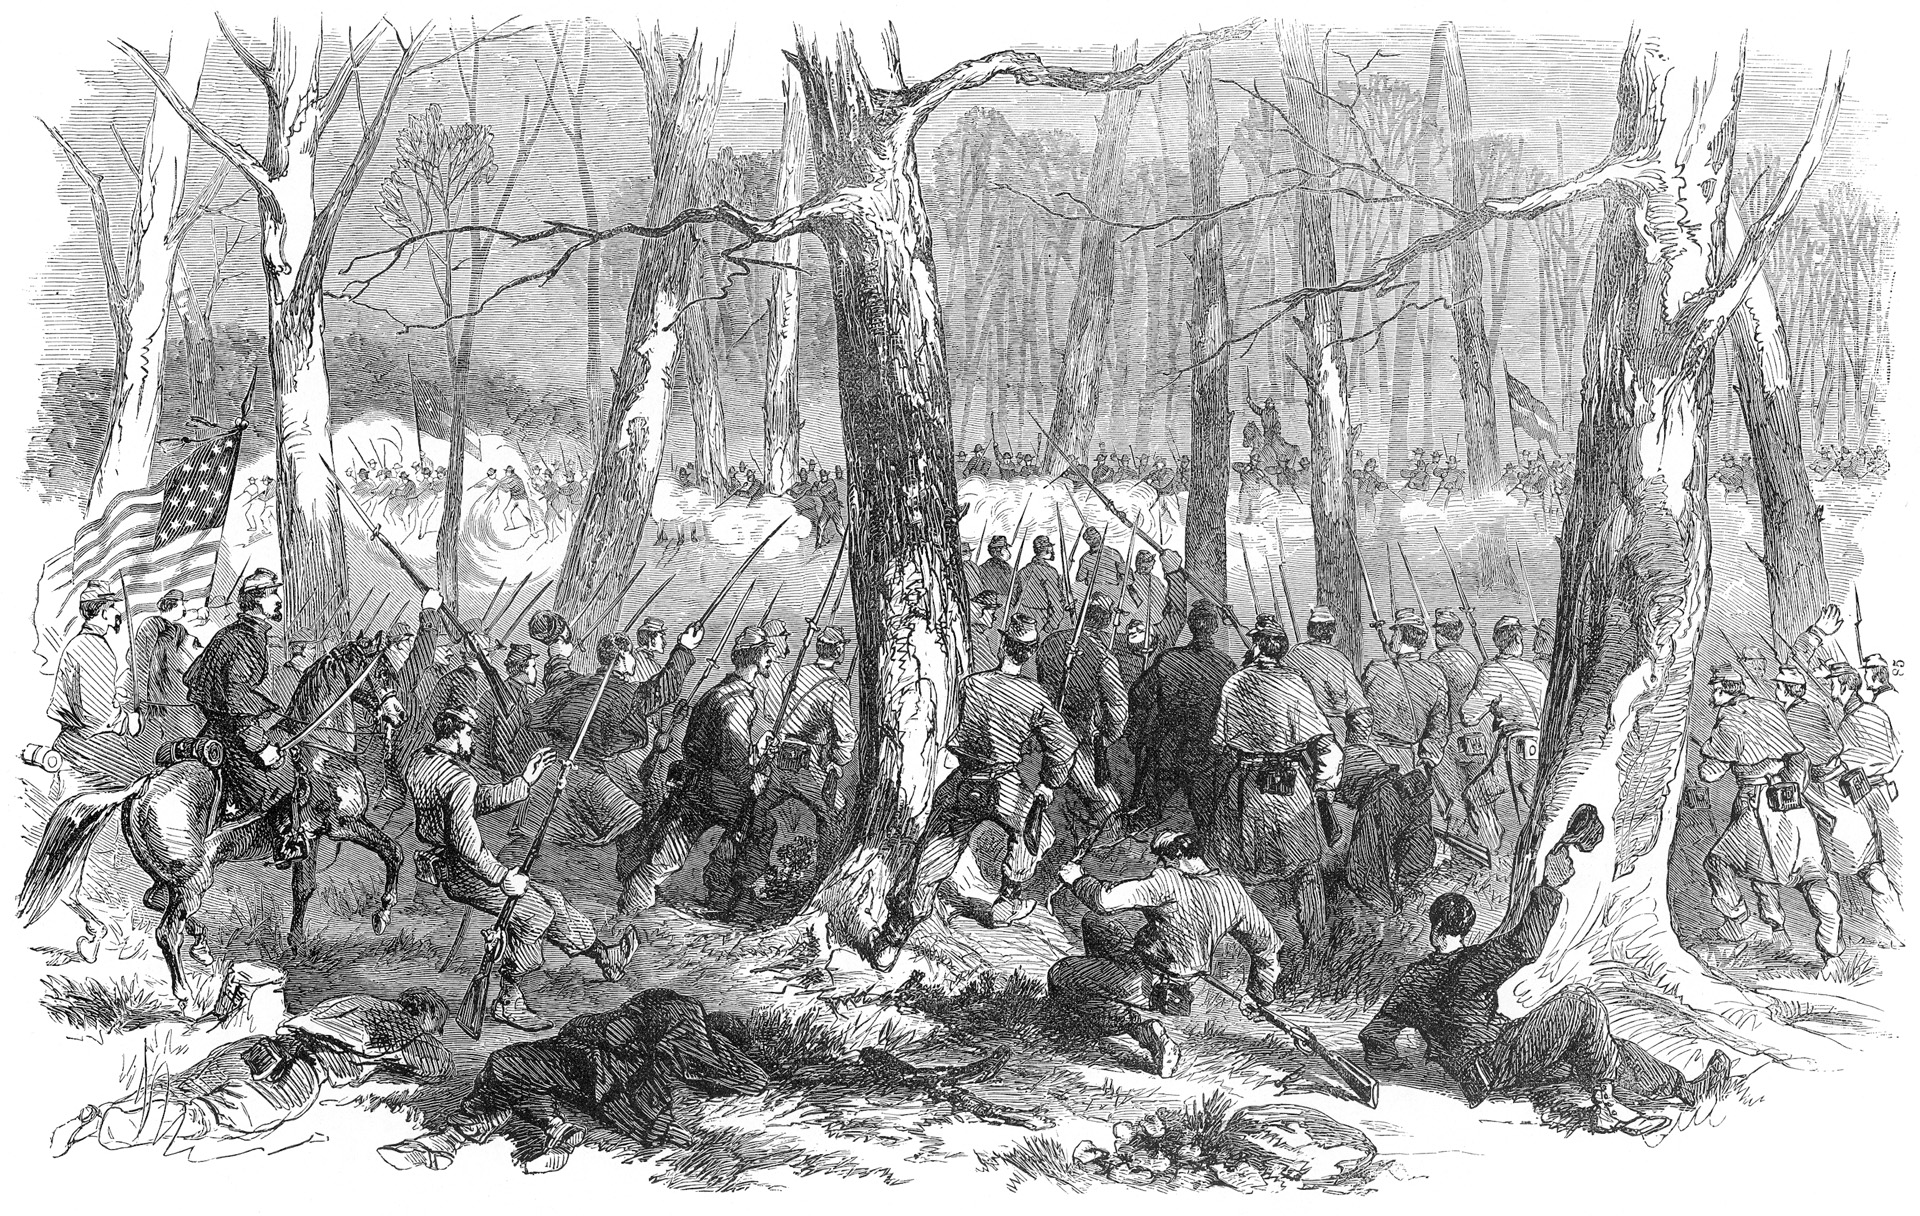 General Lew Wallace’s men charge at Confederates who have broken out of Fort Donelson. The Rebels seemingly had an opening to make good their escape when Wallace’s men moved in to cut them off. 